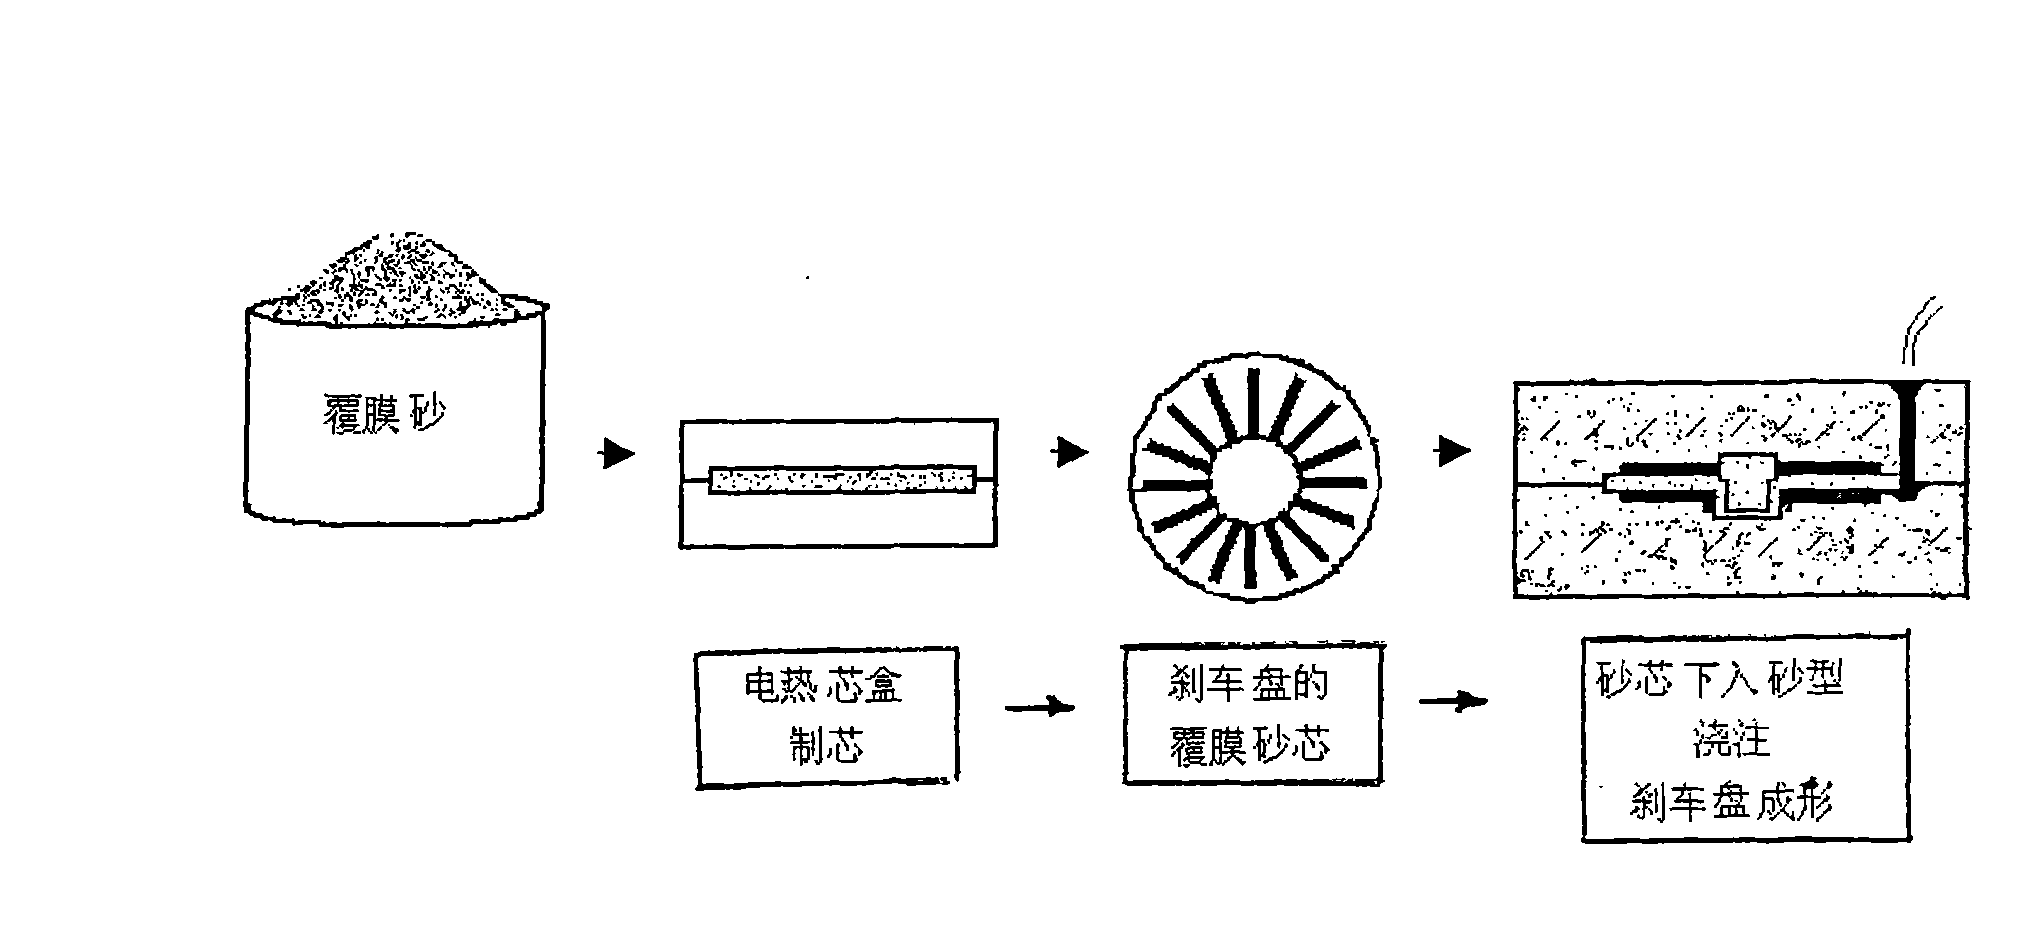 Production technology for casting brake disk air channel with pre-coated sand core method